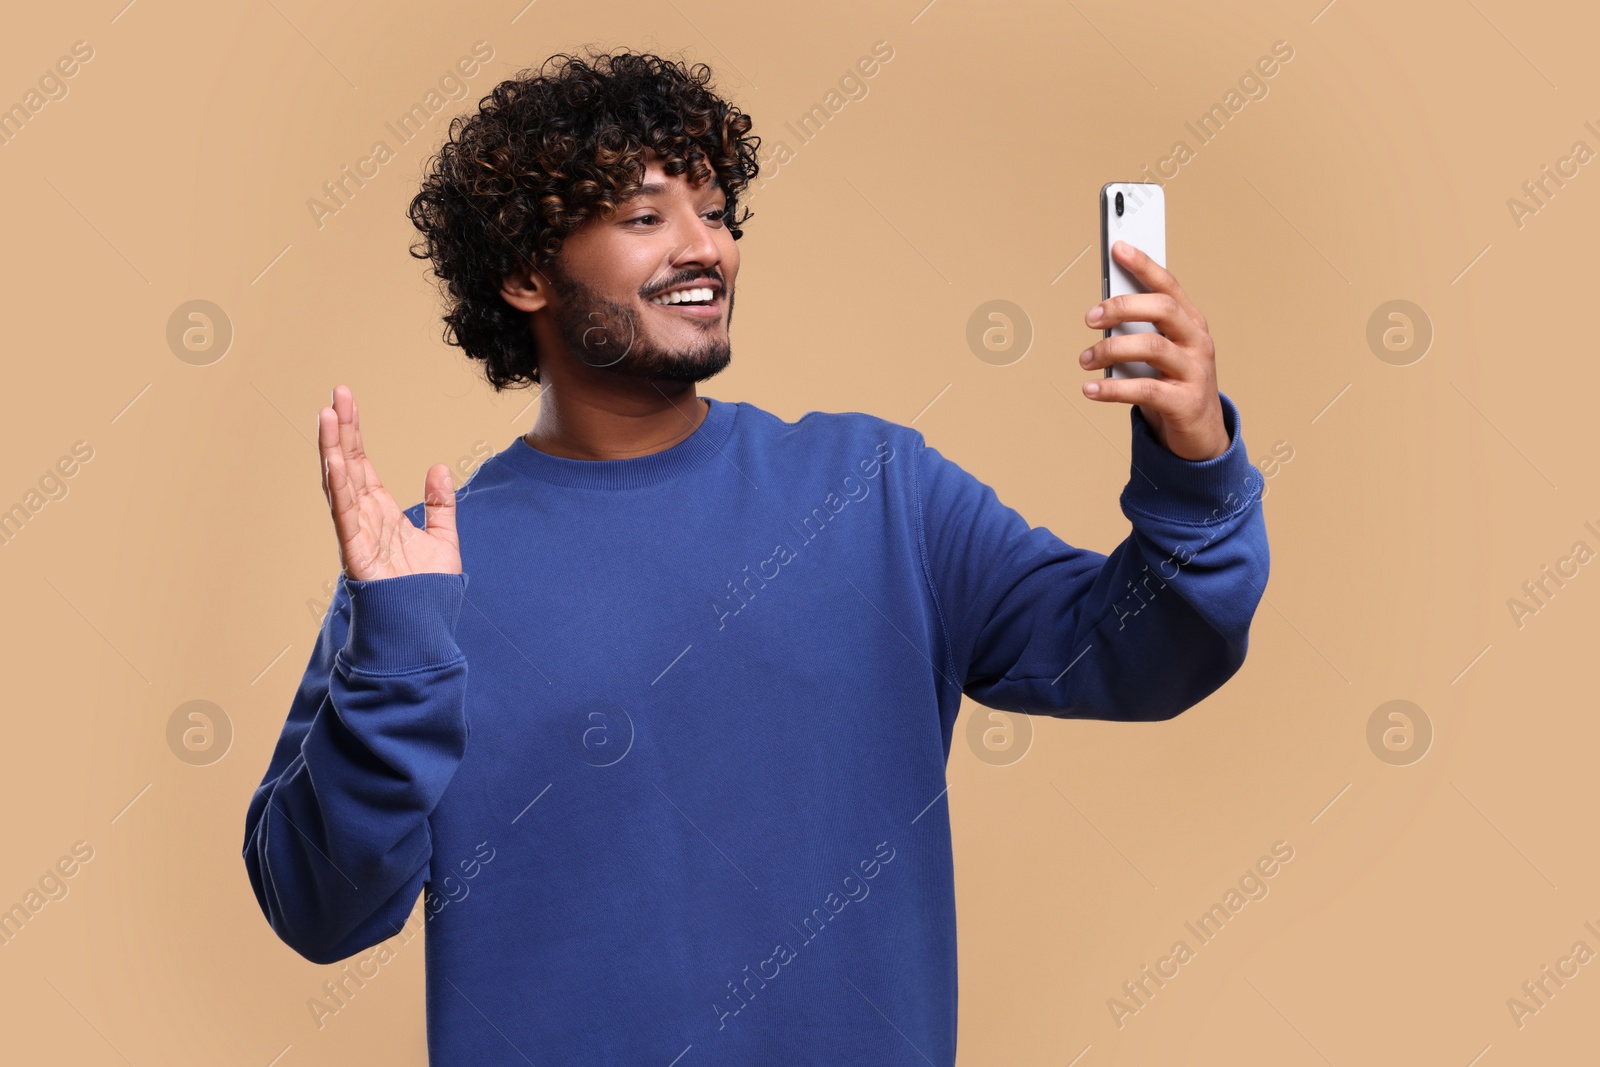 Photo of Handsome smiling man having video call via smartphone on beige background